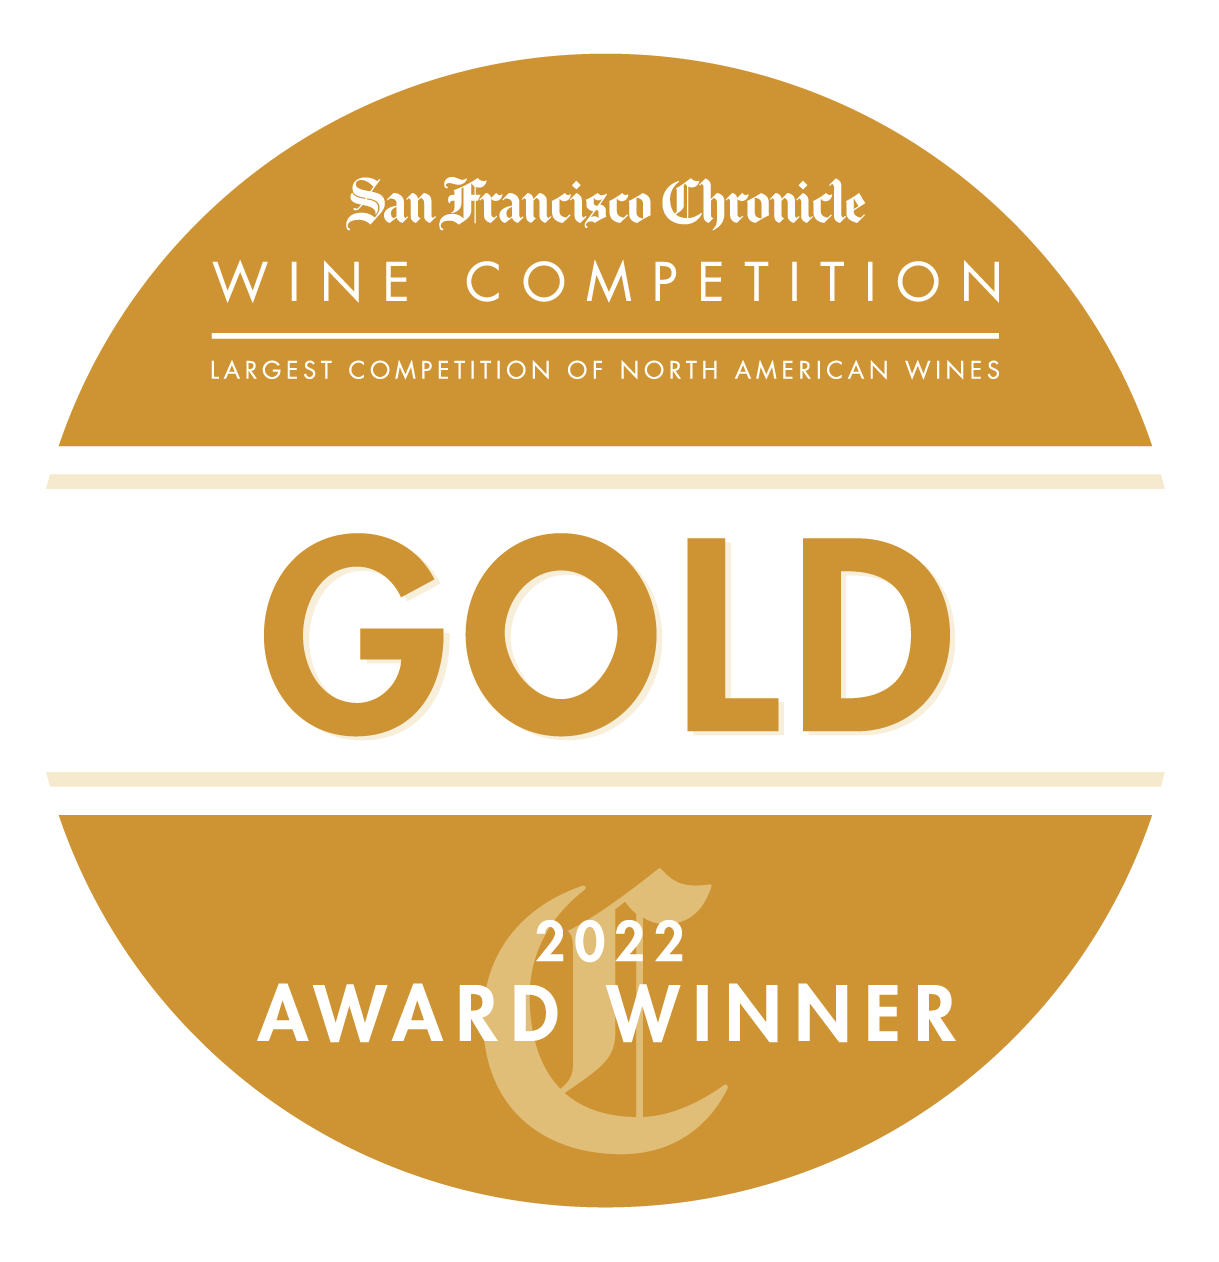 Gold circle with 2022 AWARD WINNER and GOLD for the San Francisco Wine Competition in White letters